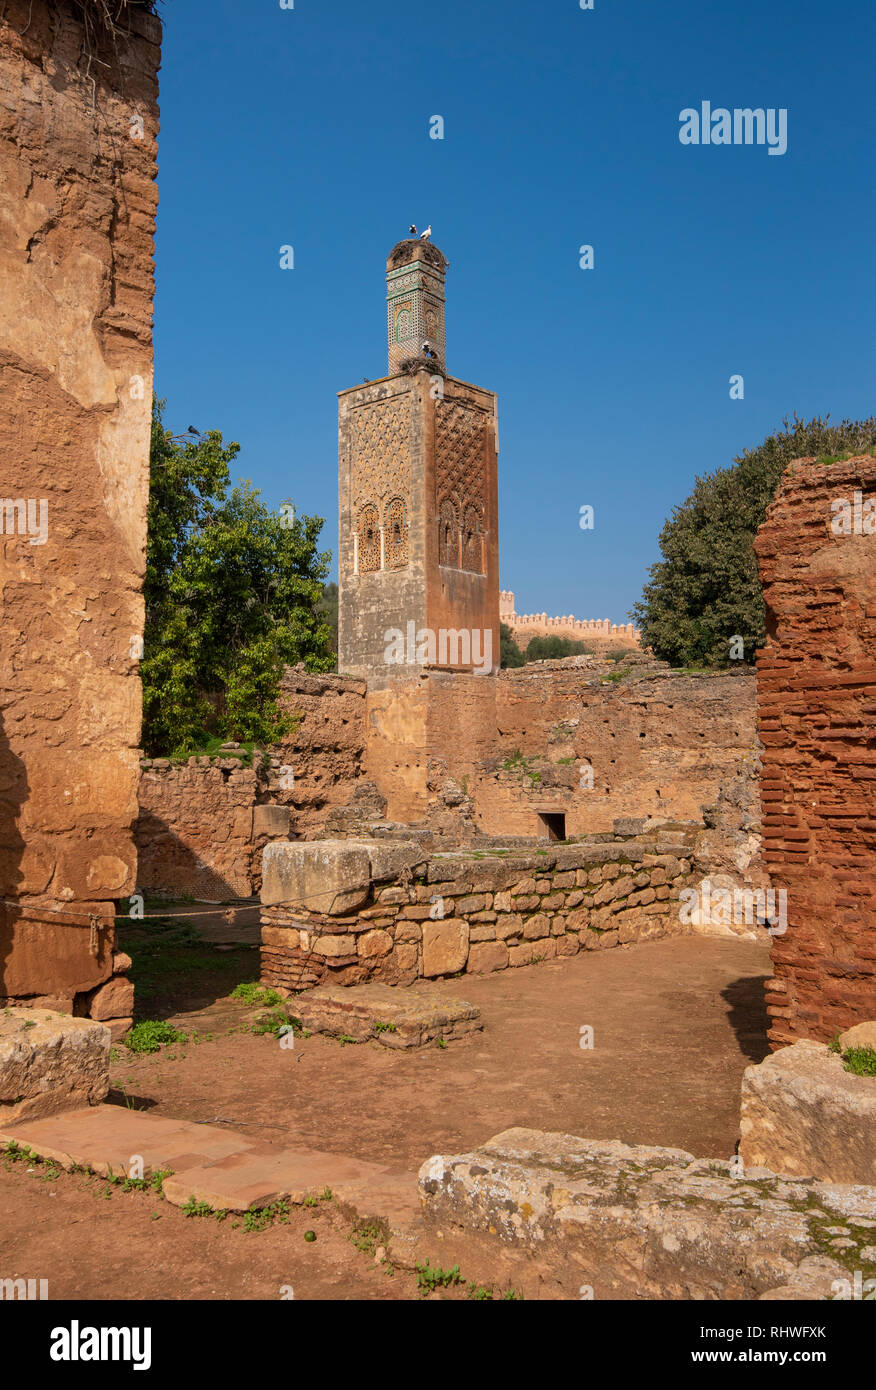 Minaret of the mosque in Chellah or Sala Colonia is a medieval fortified necropolis located in Rabat, Morocco. Park with old ruins and history forum Stock Photo